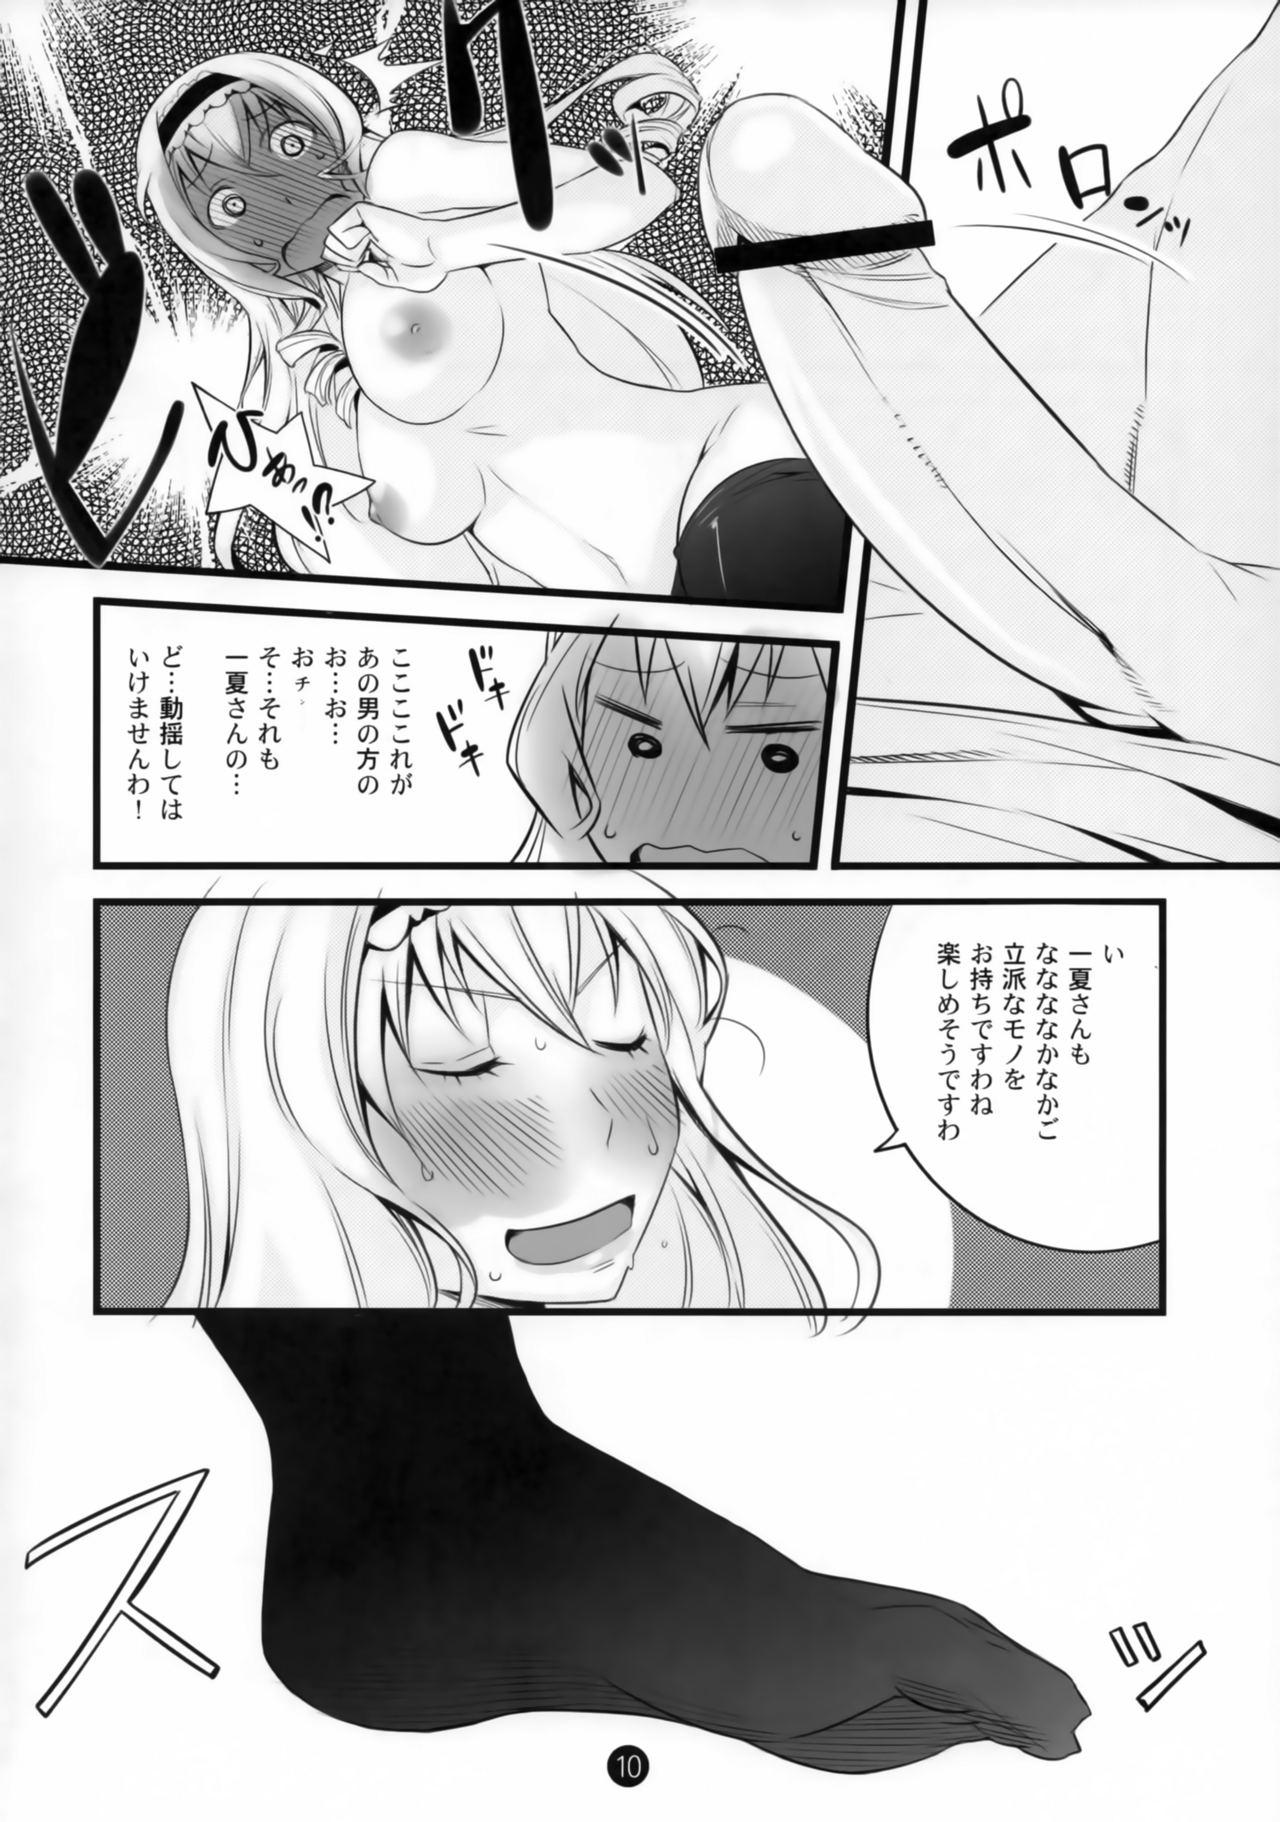 Sixtynine Summer Of Love - Infinite stratos Freaky - Page 11